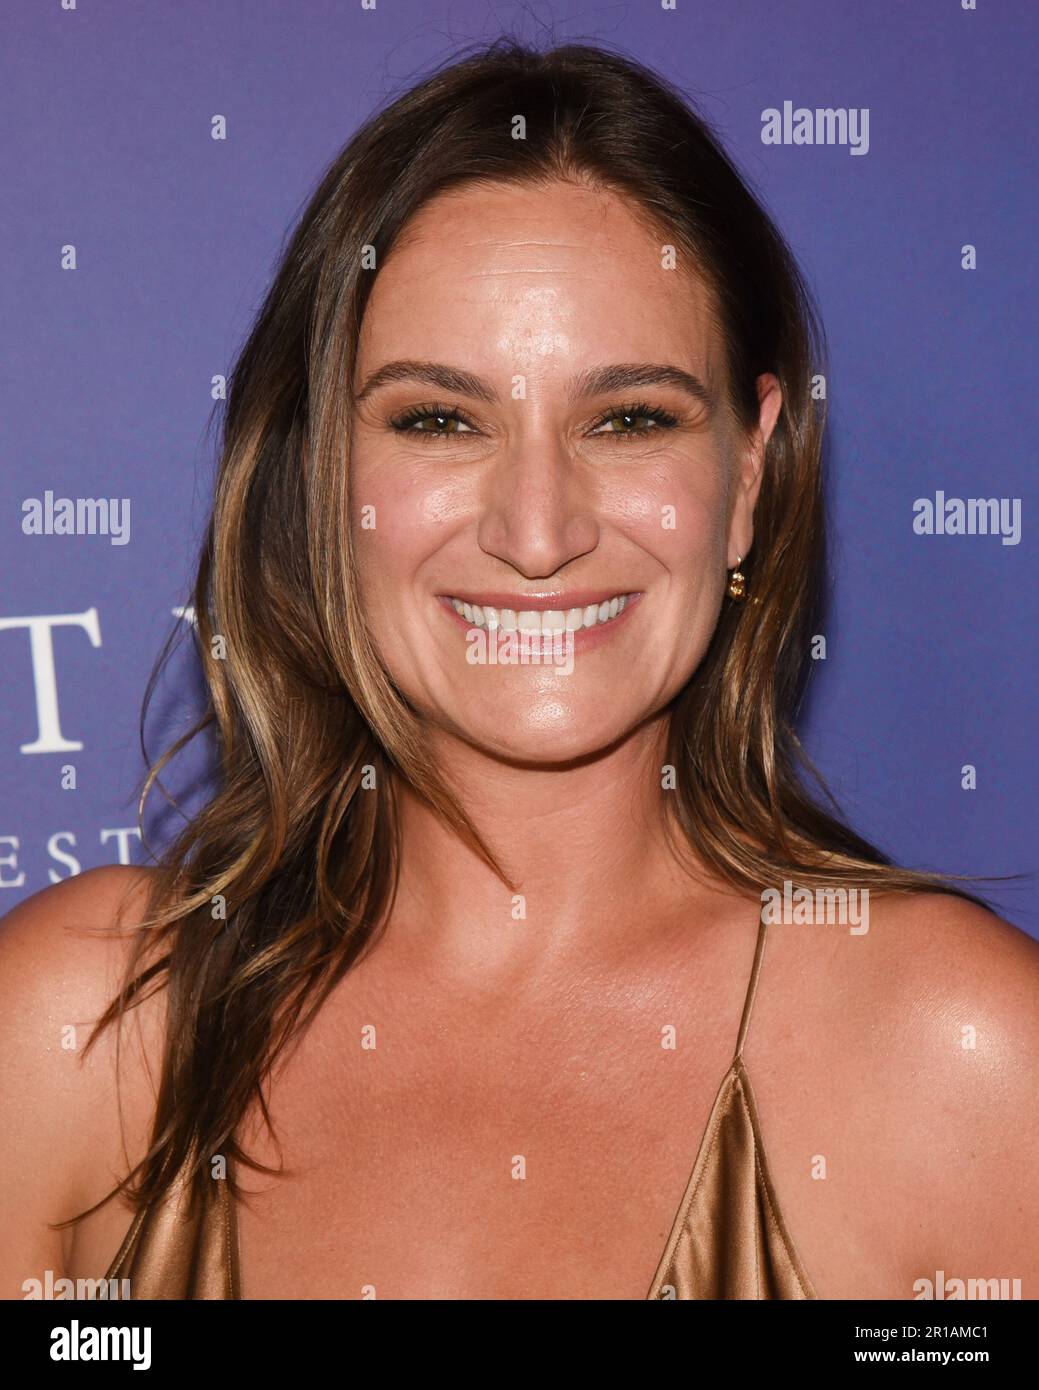 Hollywood, California, USA. 11th May, 2023. Ashley Avis. LA Premiere Of  "Wild Beauty: Mustang Spirit of the West" at DGA Theater Complex. Credit:  Billy Bennight/AdMedia/Newscom/Alamy Live News Stock Photo - Alamy